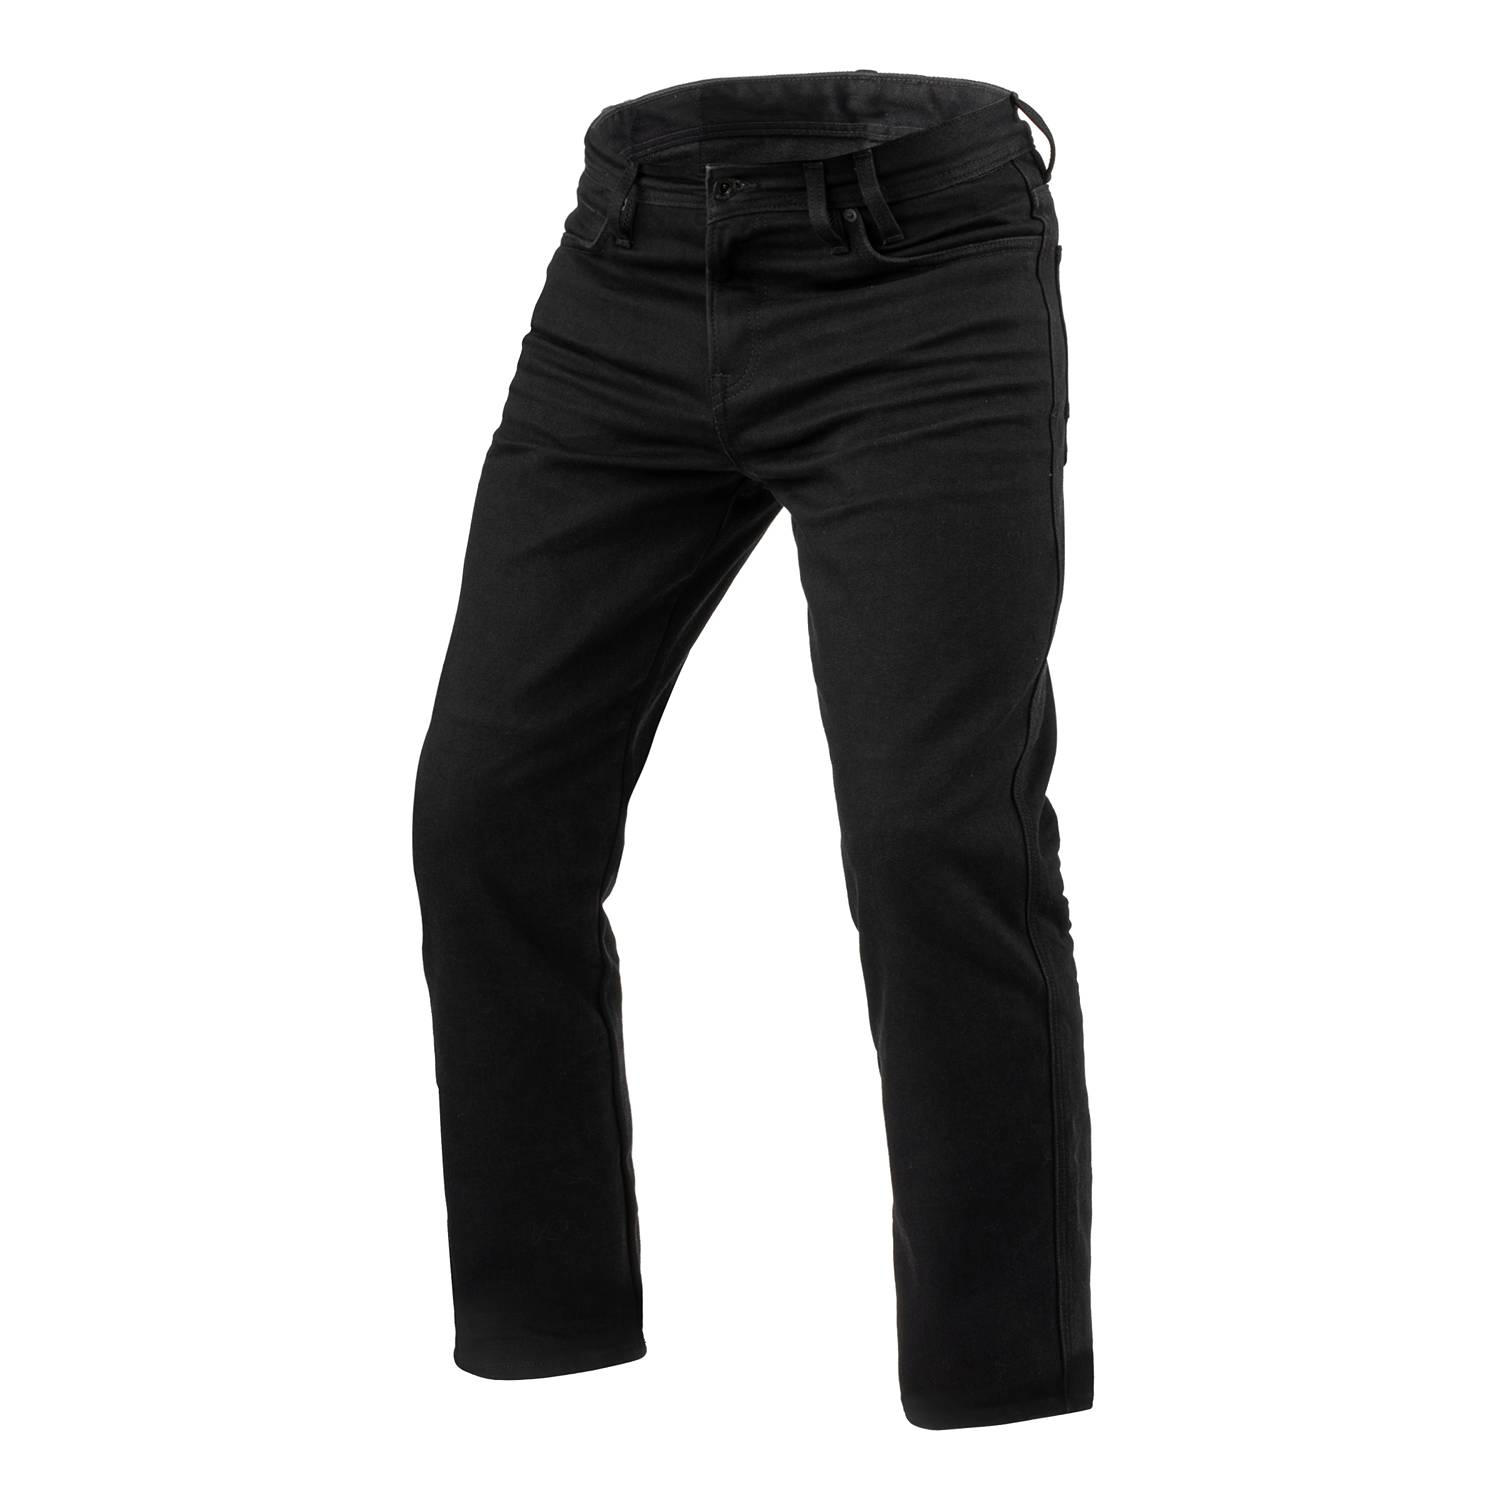 Image of REV'IT! Jeans Lombard 3 RF Black L36 Motorcycle Jeans Size L36/W31 ID 8700001375870